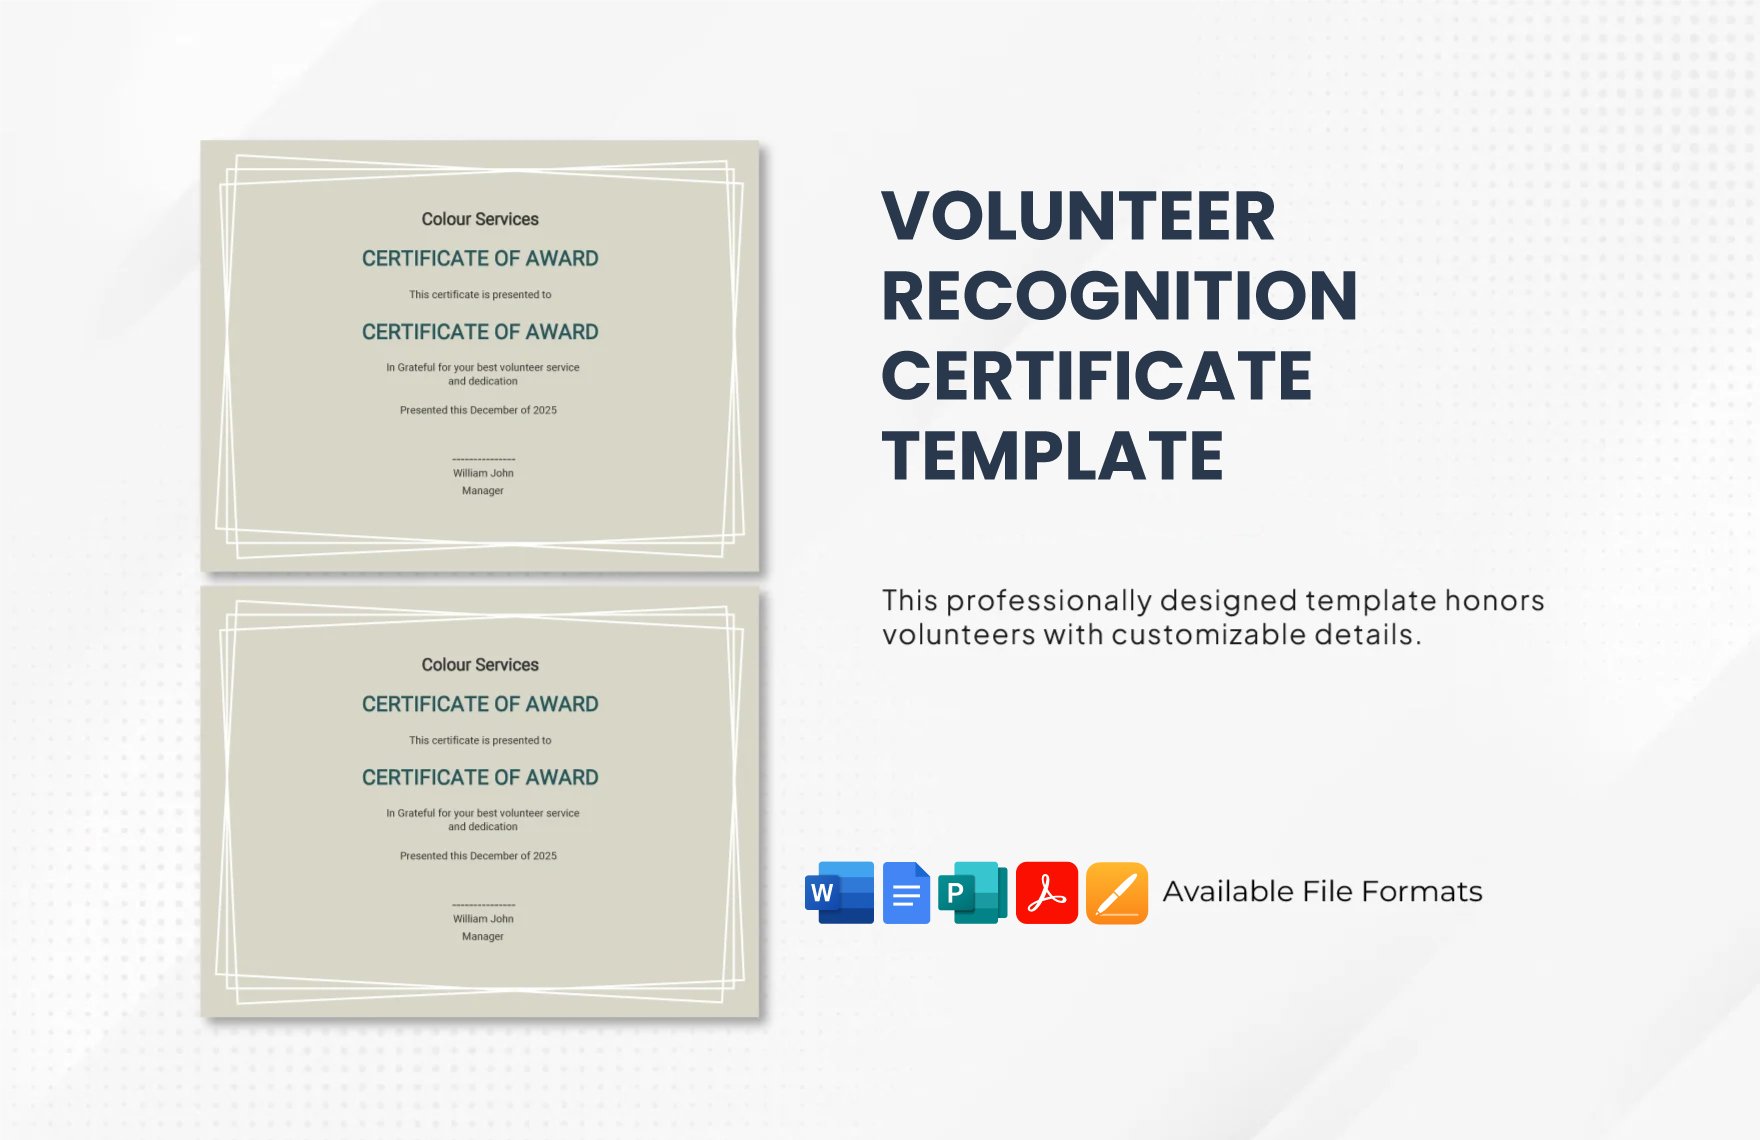 Free Volunteer Recognition Certificate Template Template in Word, Google Docs, PDF, Apple Pages, Publisher